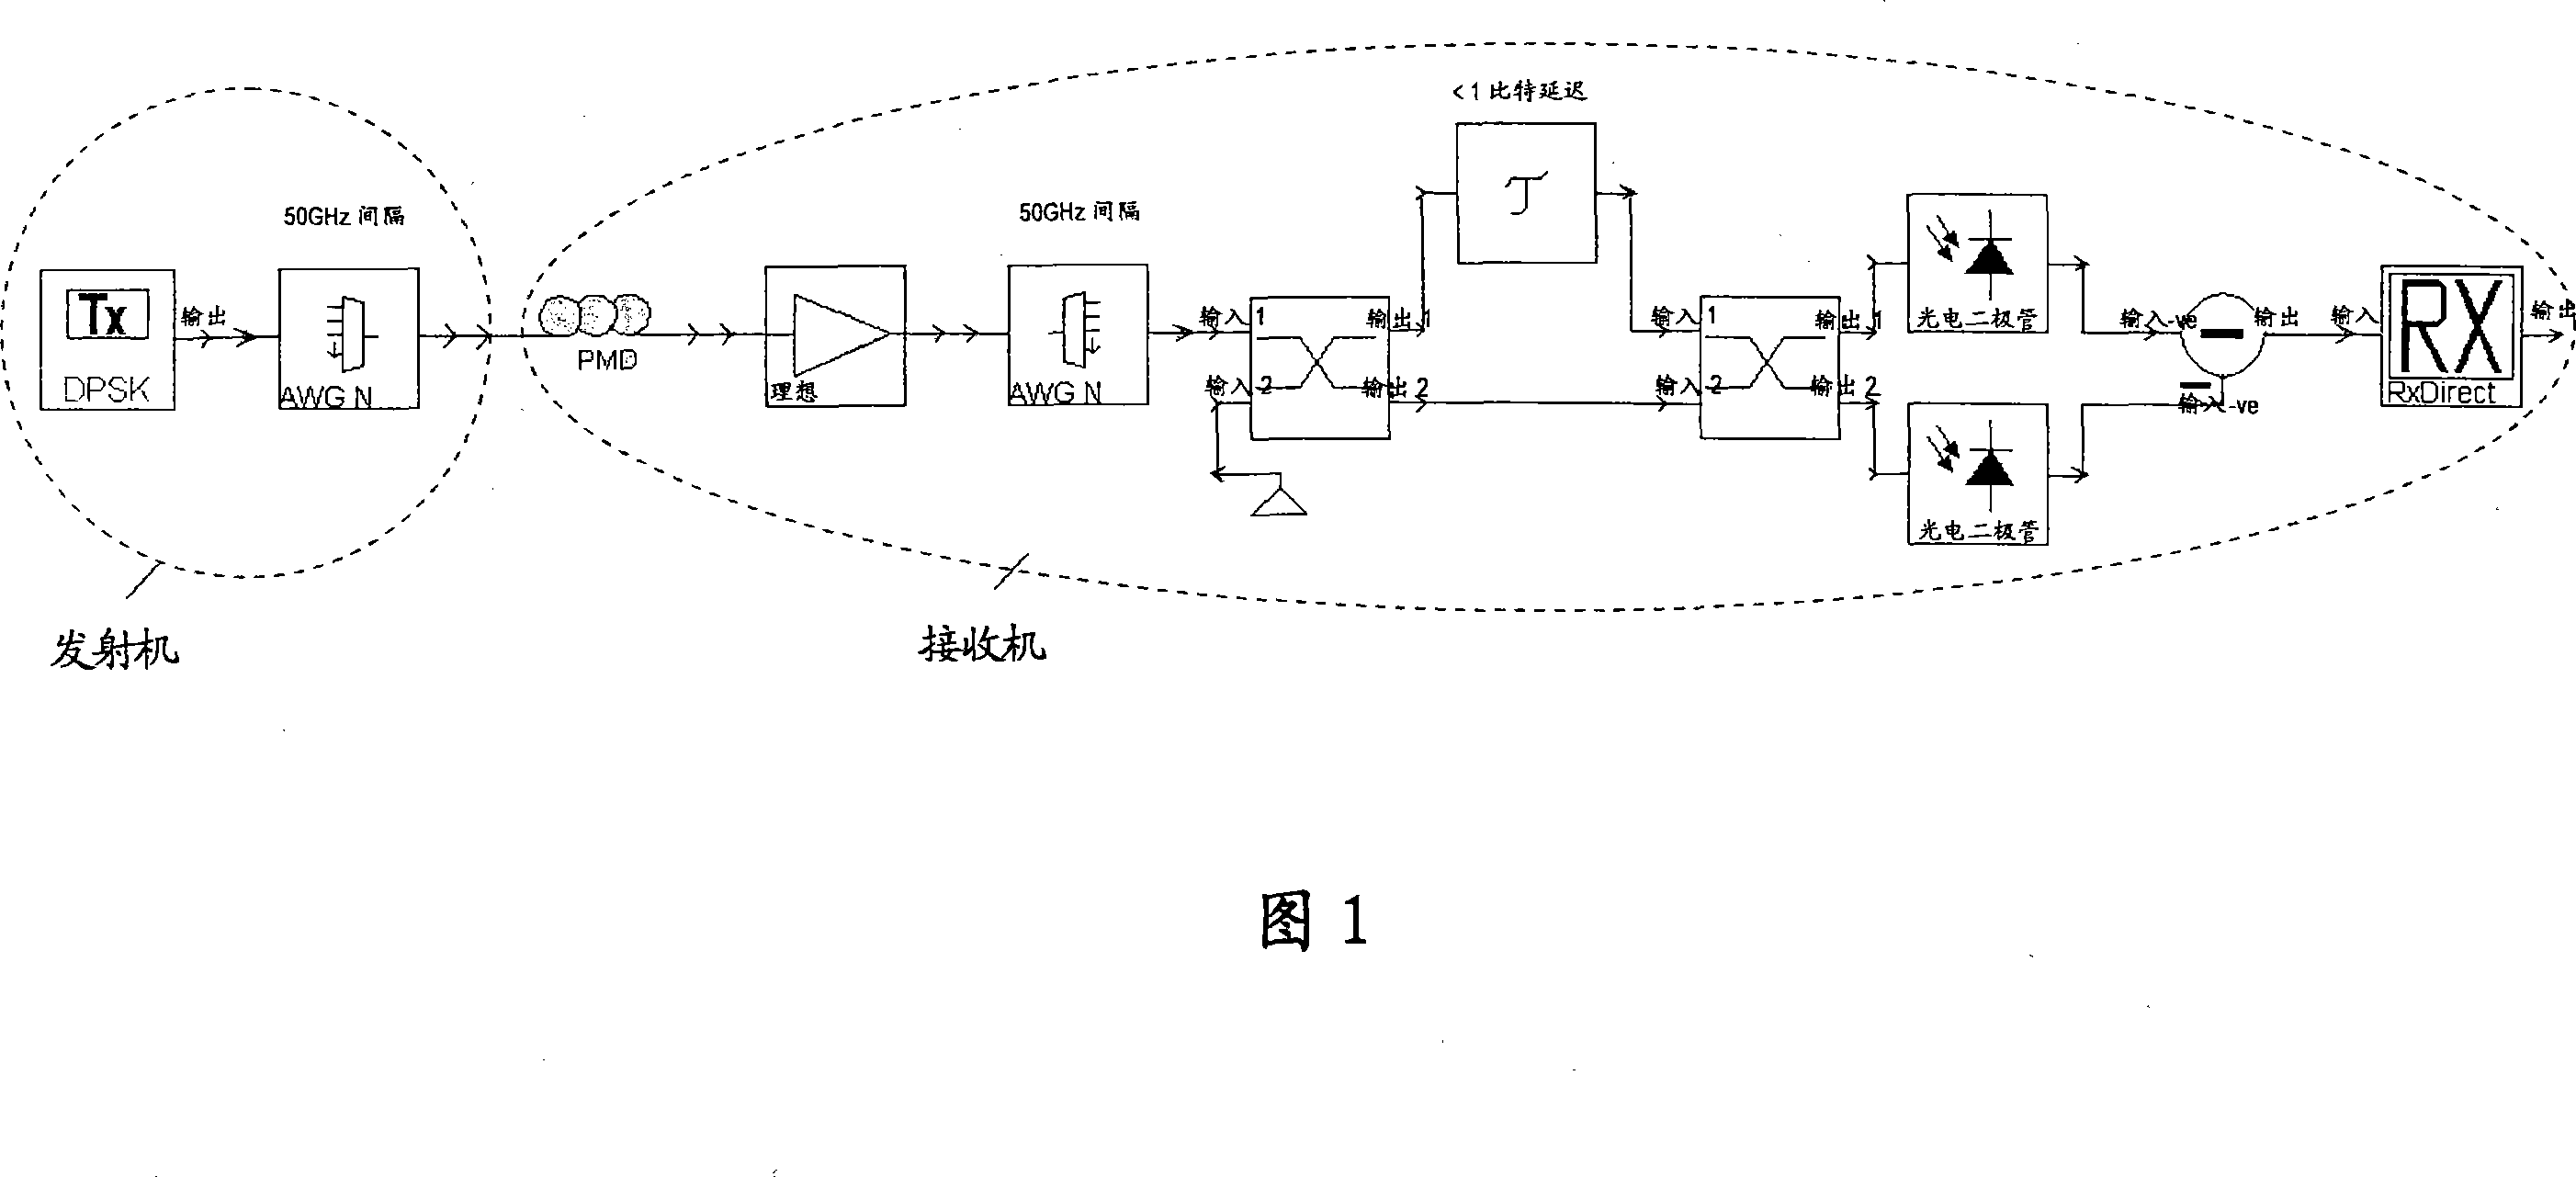 Method and receiver to increase the spectral efficiency of dpsk modulation format